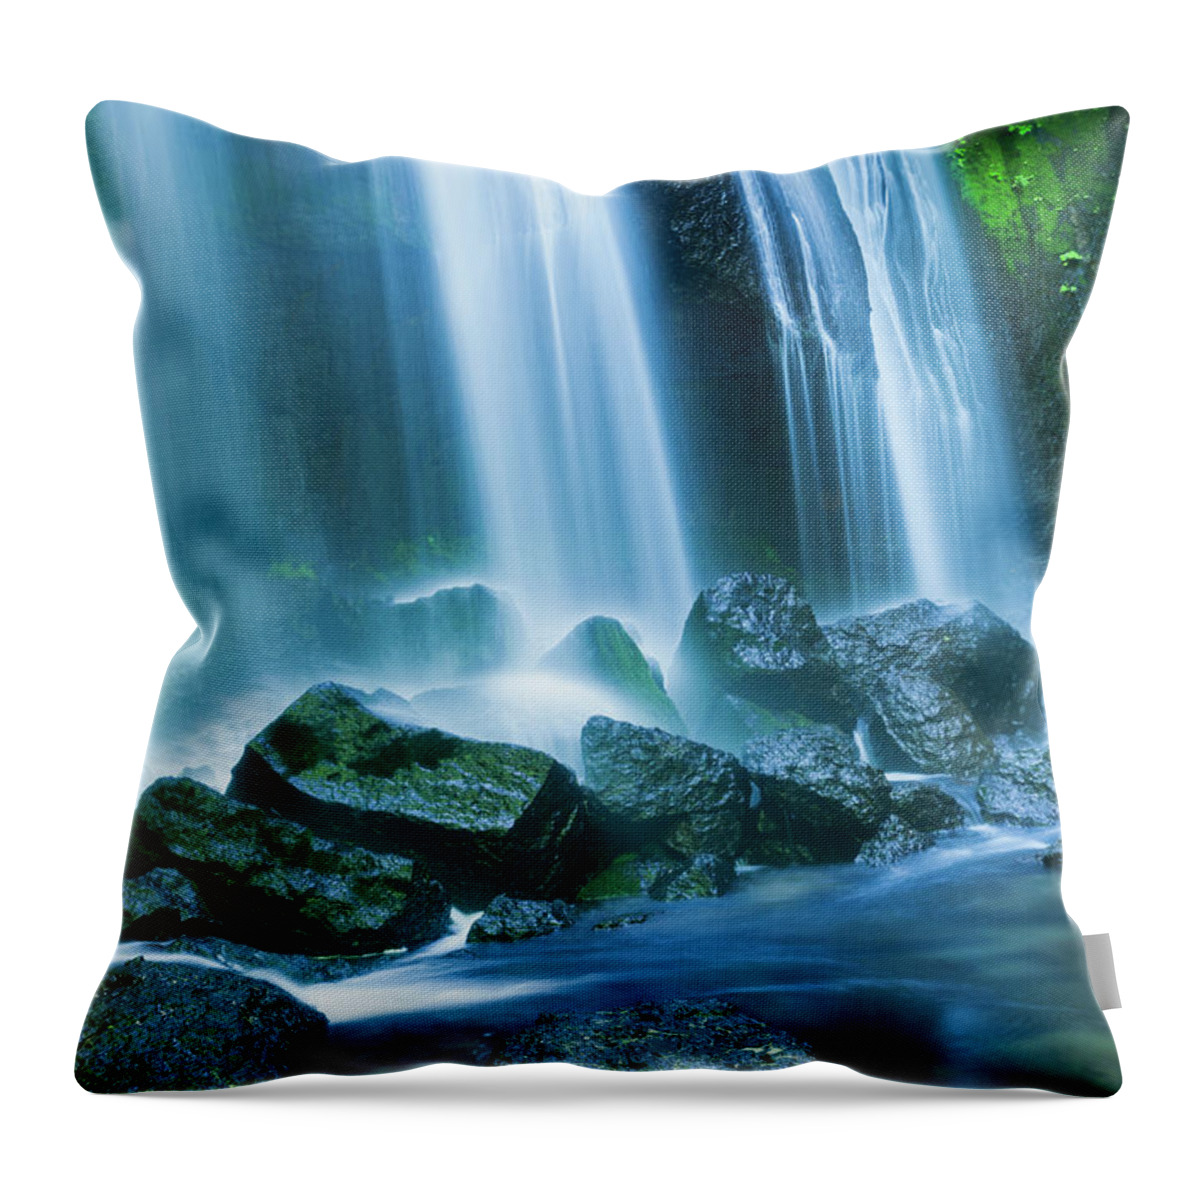 Scenics Throw Pillow featuring the photograph Cascading Water #2 by Ooyoo